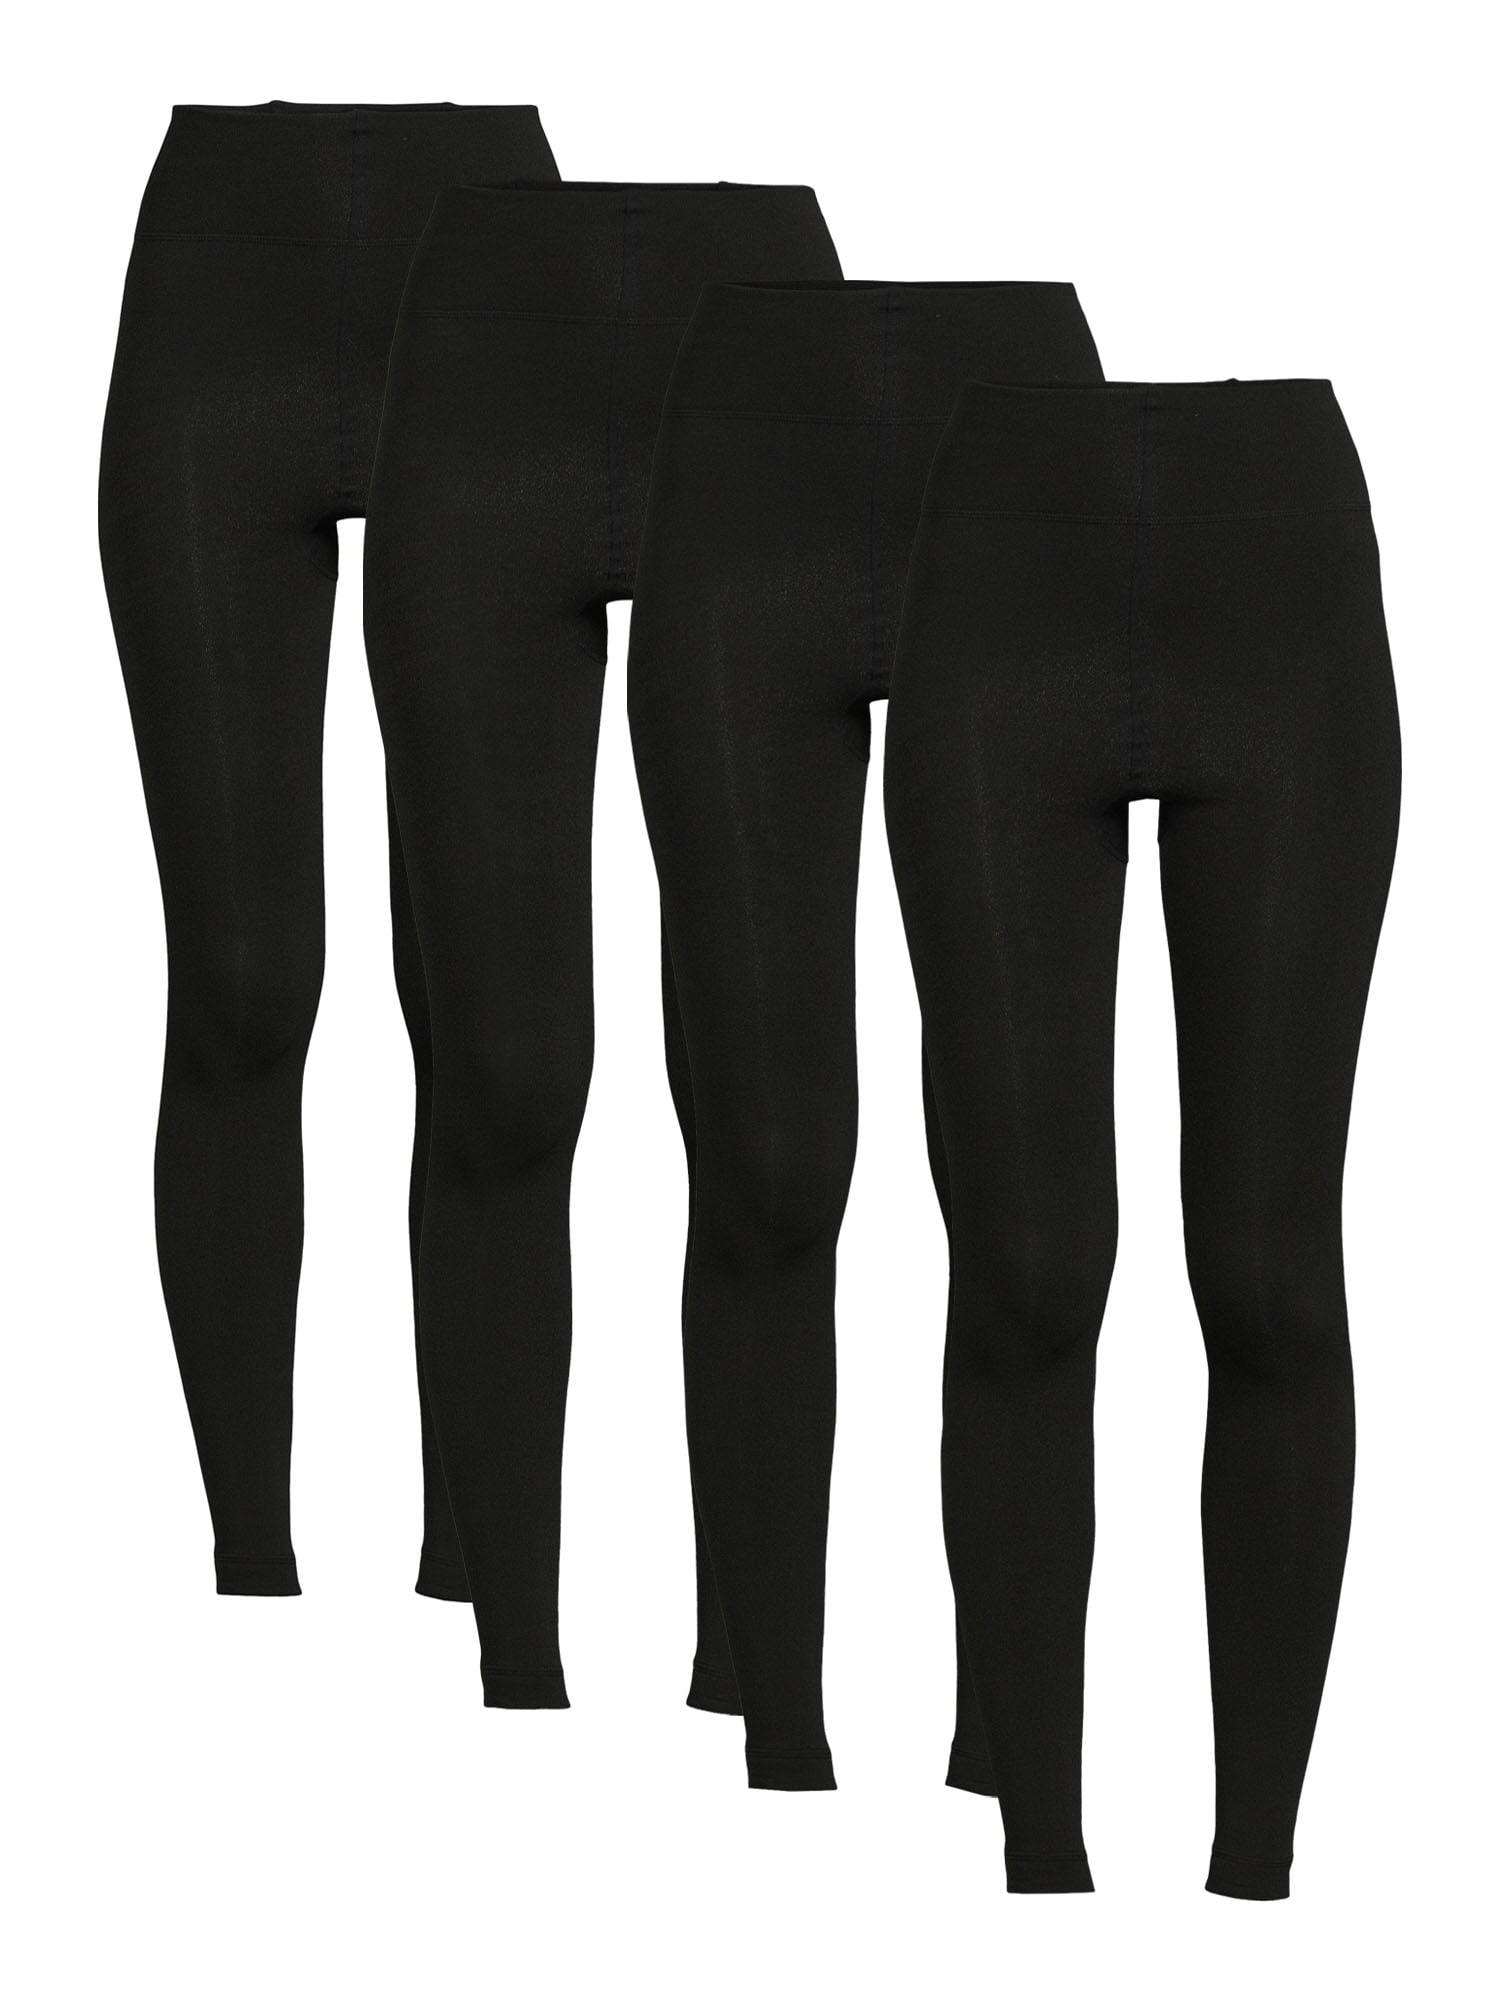 Details about   Women's Black Fleece Lined Tights Ribbed or Smooth and Seamless S/M or M/L NWT! 